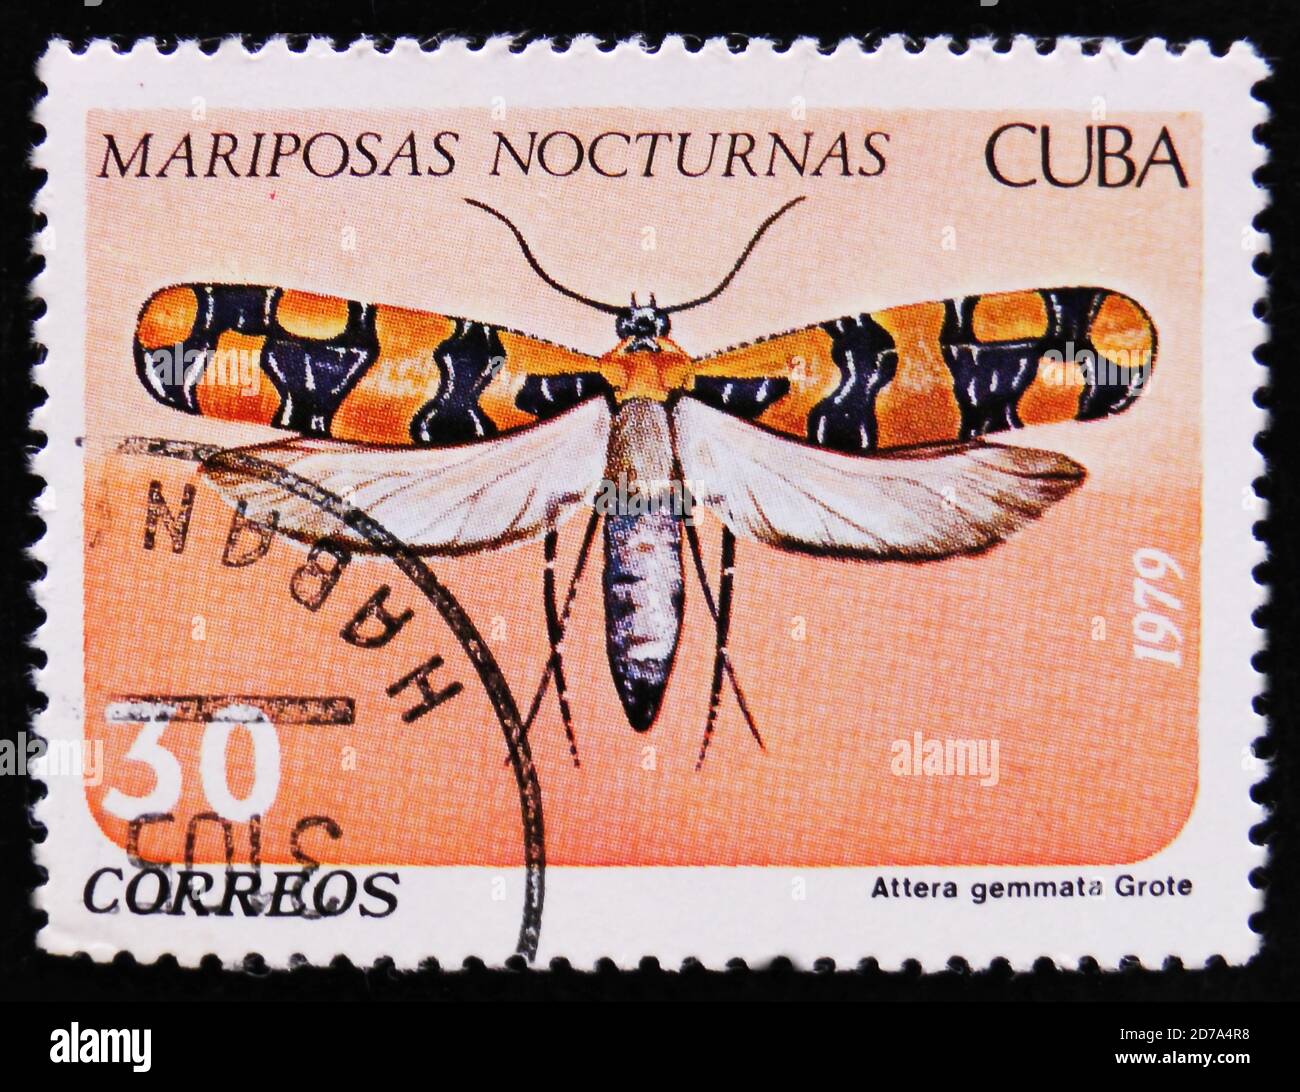 MOSCOW, RUSSIA - APRIL 2, 2017: A Stamp printed in Cuba shows image of a Attera gemmata Grote butterfly (Mariposas nocturnas), Night moth series, circ Stock Photo